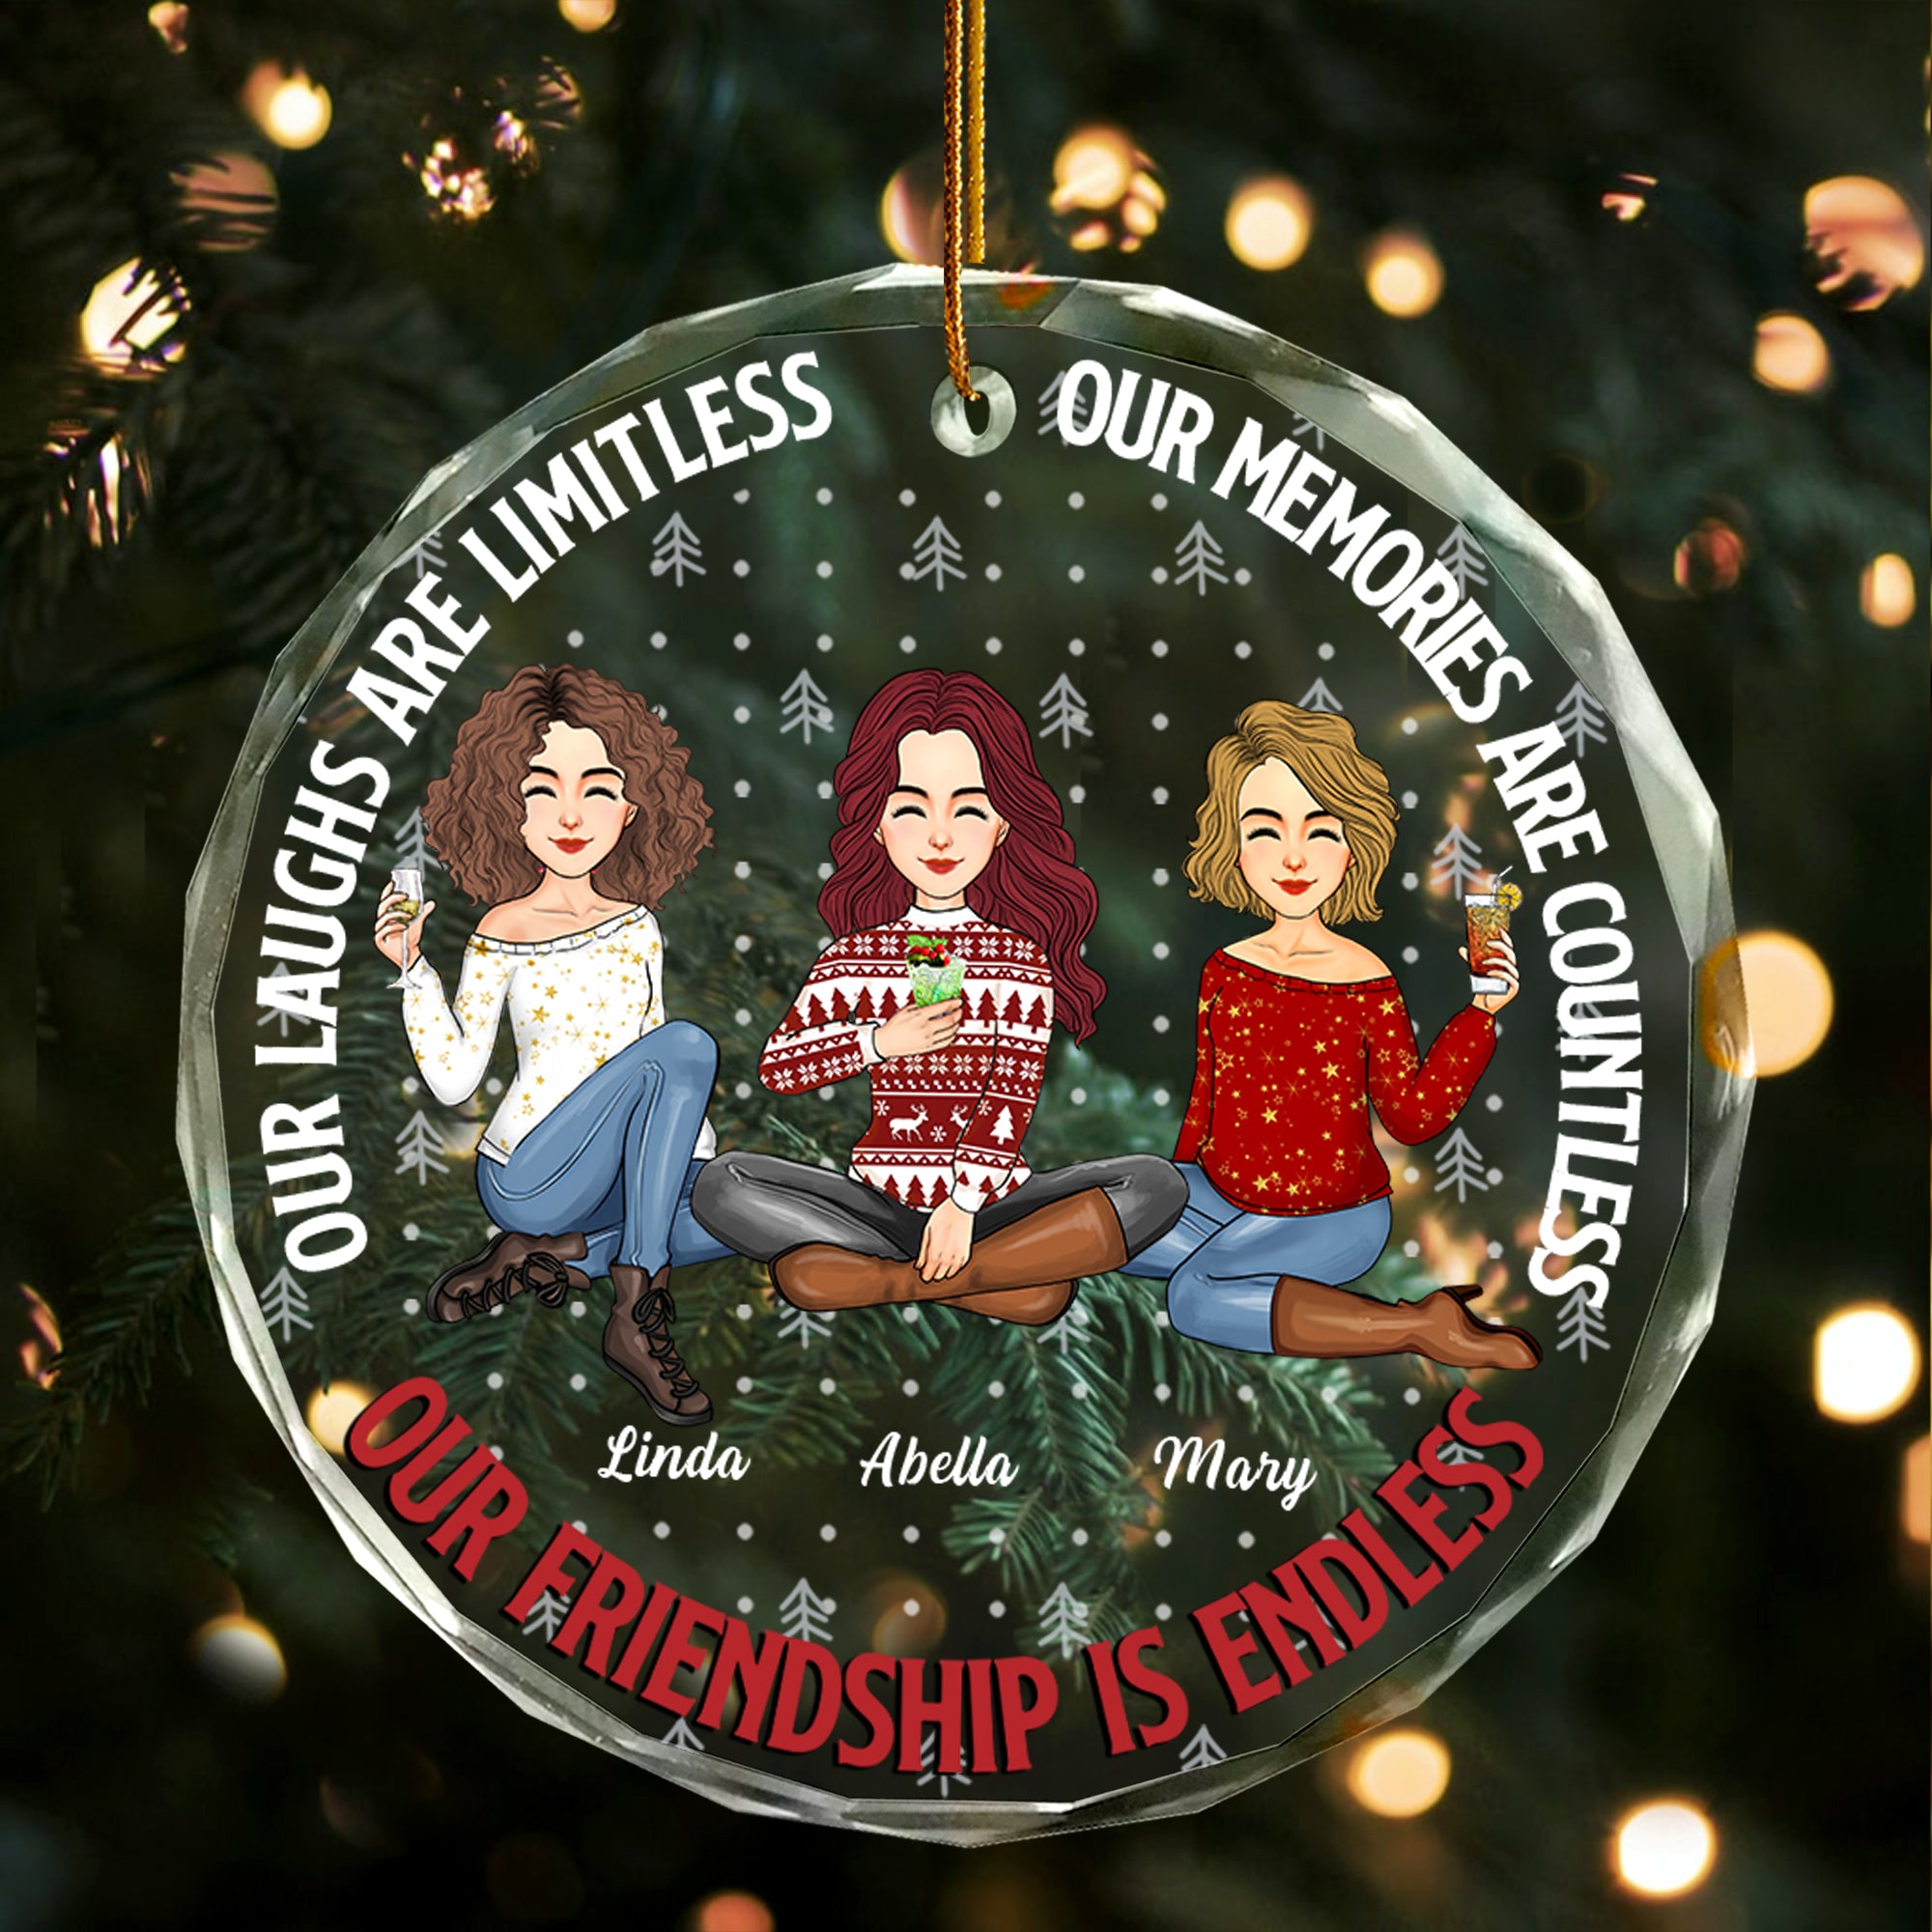 Luxury Ornament Our Friendship Is Endless - Personalized Glass Ornament